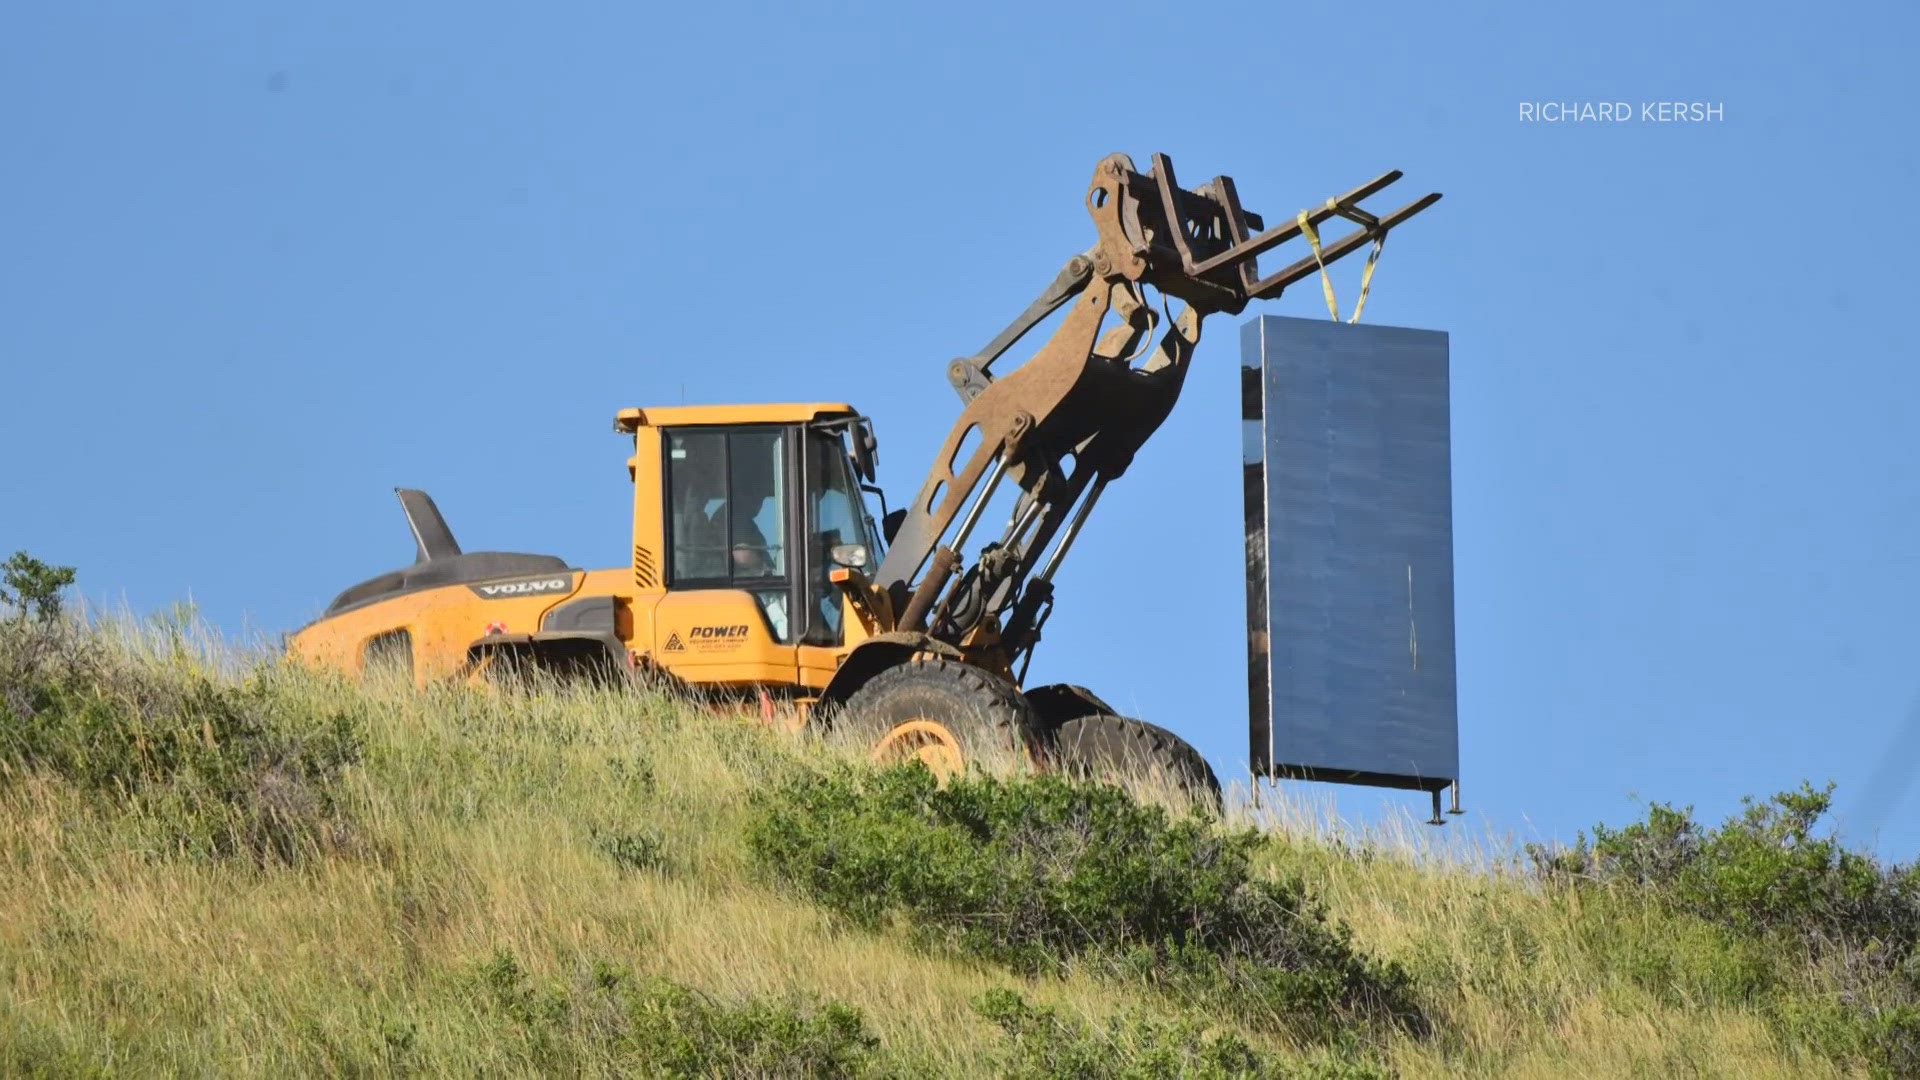 A monolith that mysteriously appeared on a hill at a northern Colorado dairy farm has been removed.